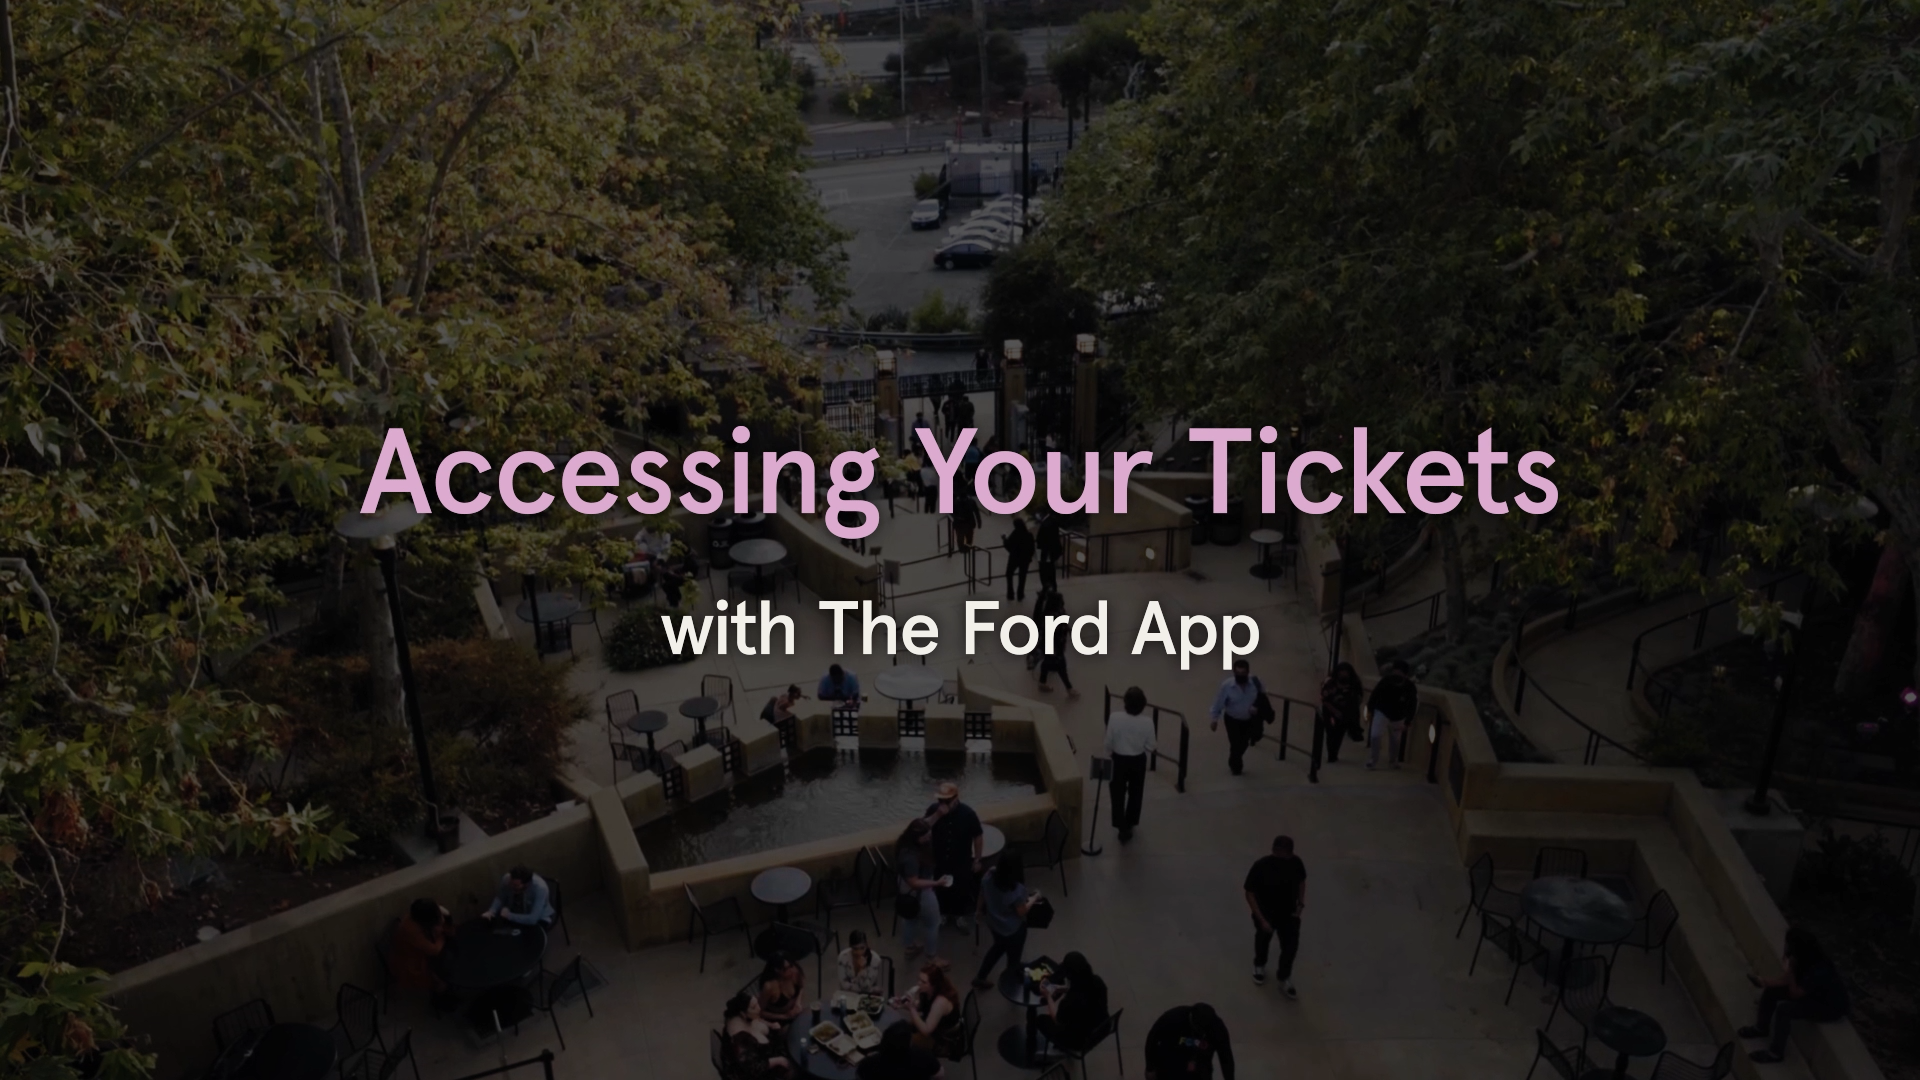 Video about Accessing Your Tickets on The Ford App